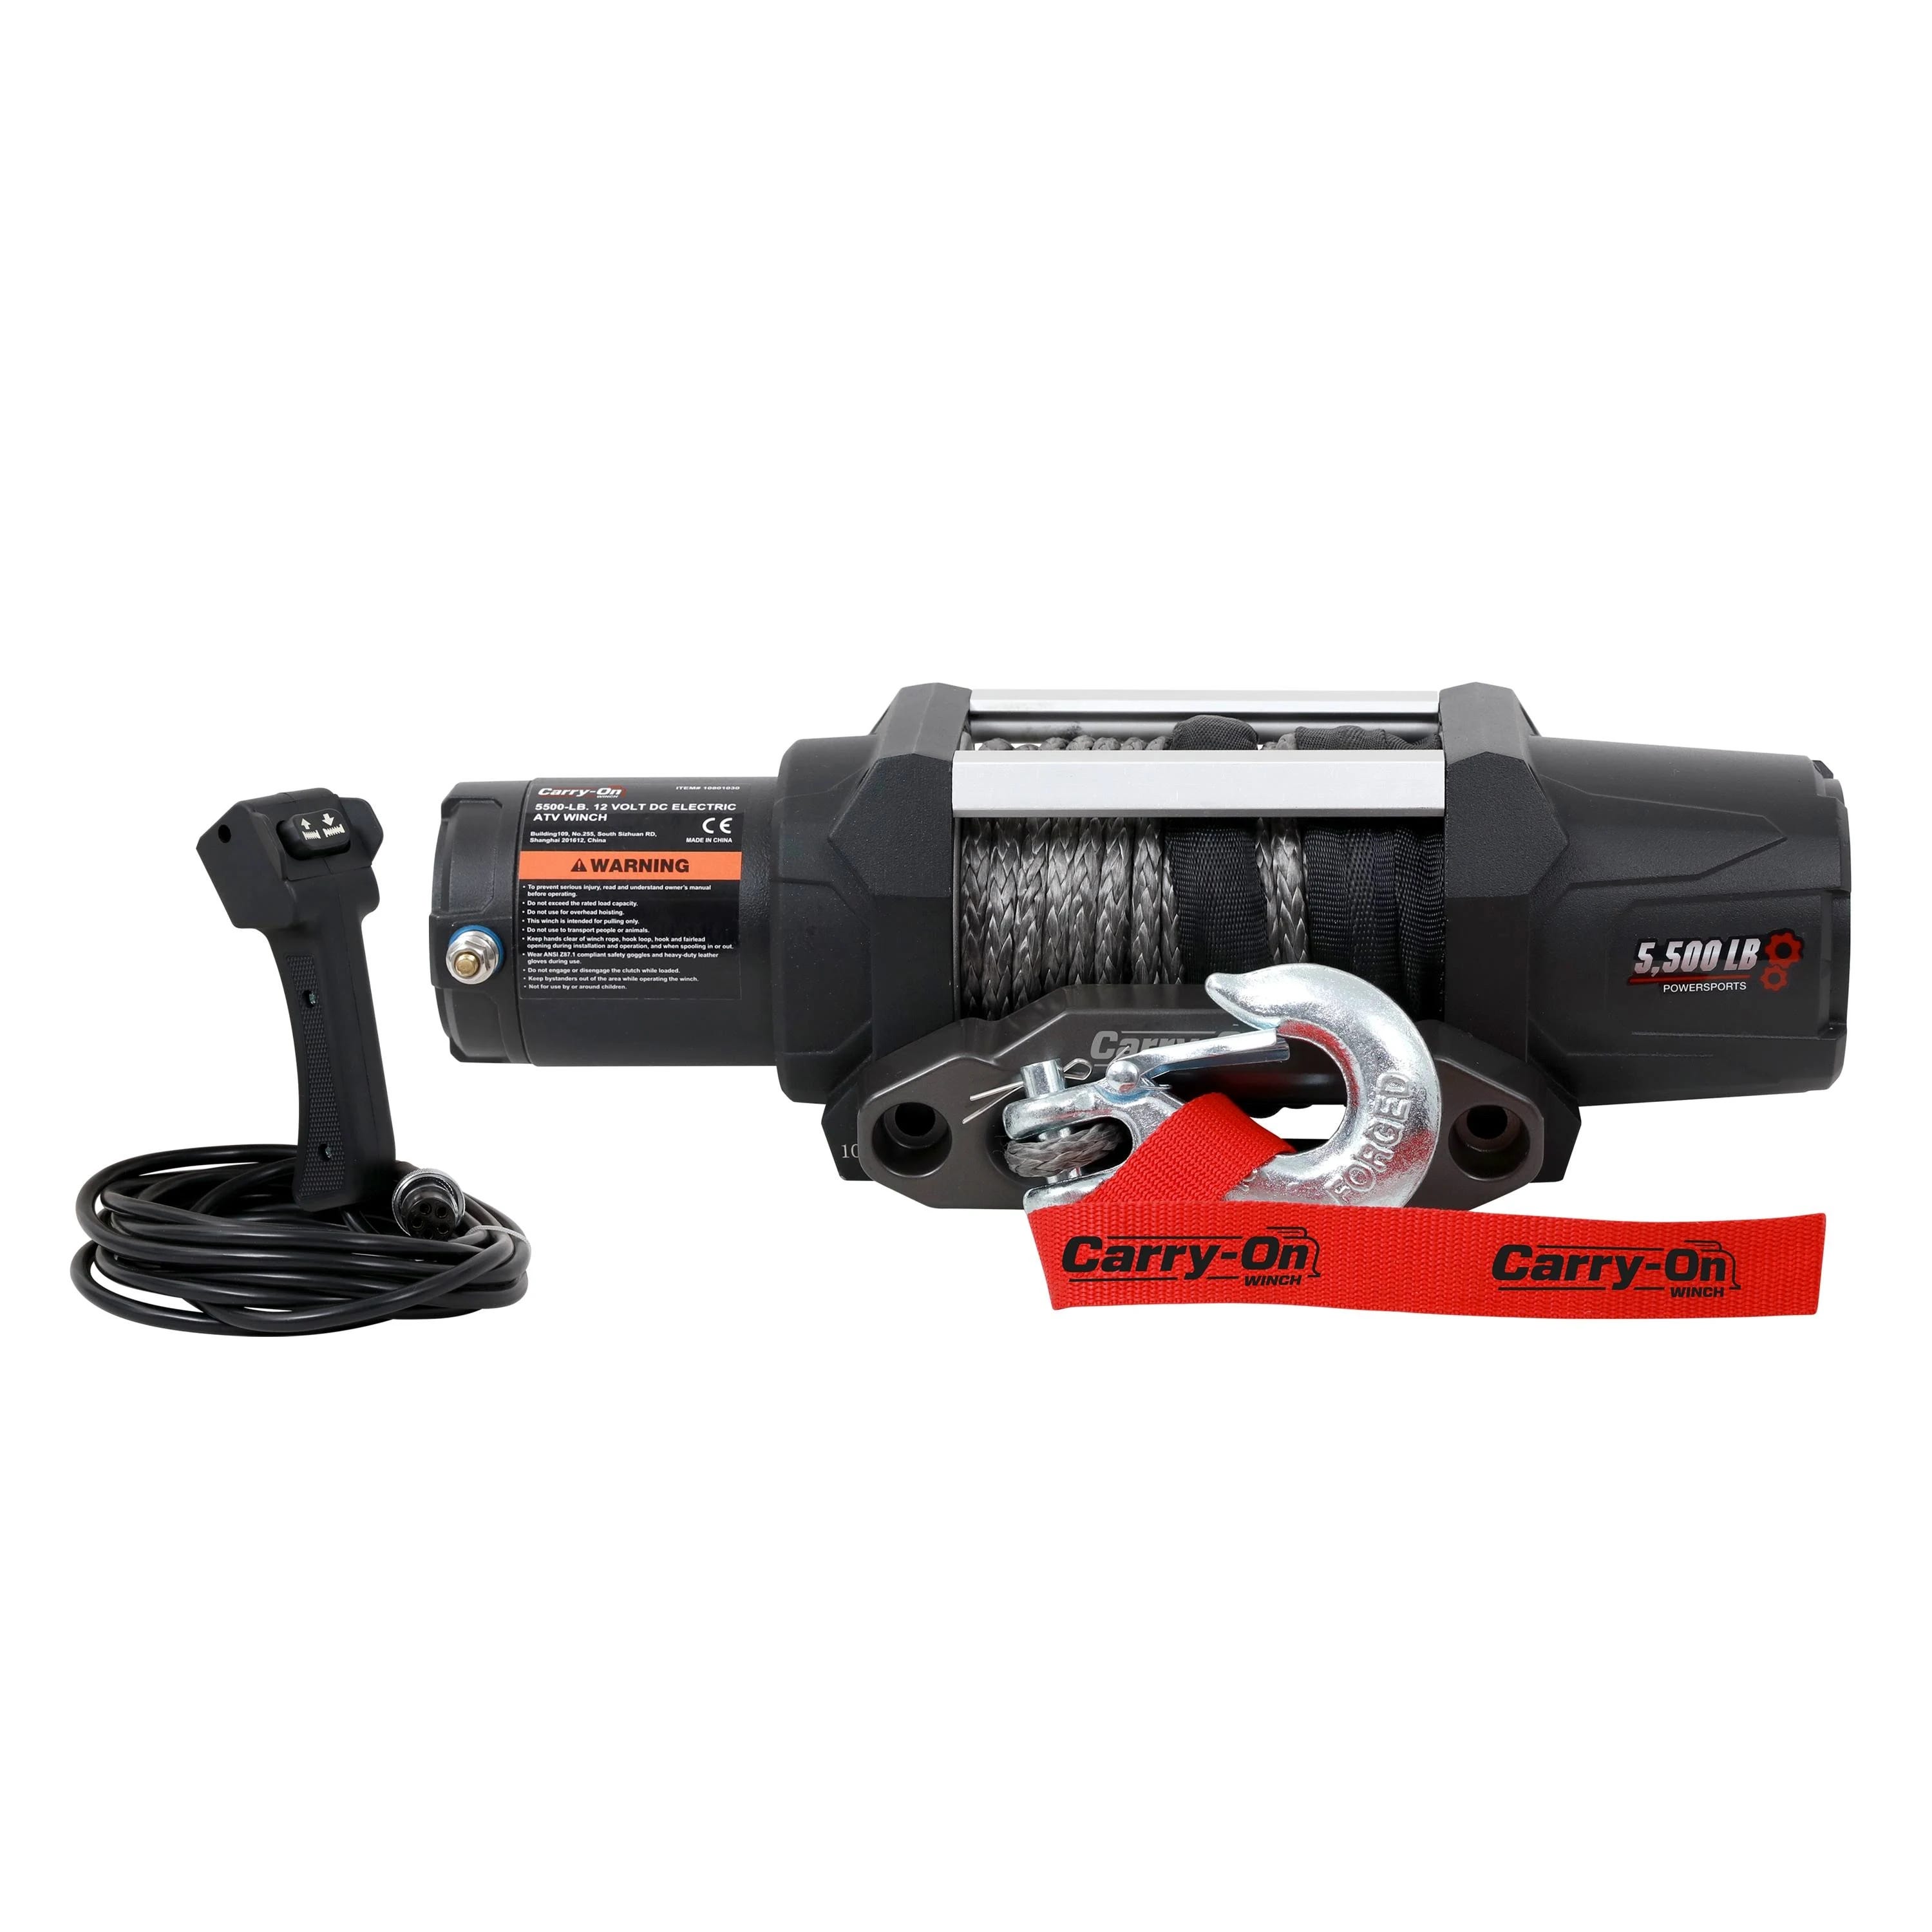 Premium 5500 lb. 12V Trailer Winch with 1.5 HP Motor & 50 ft. Wire Rope | Image